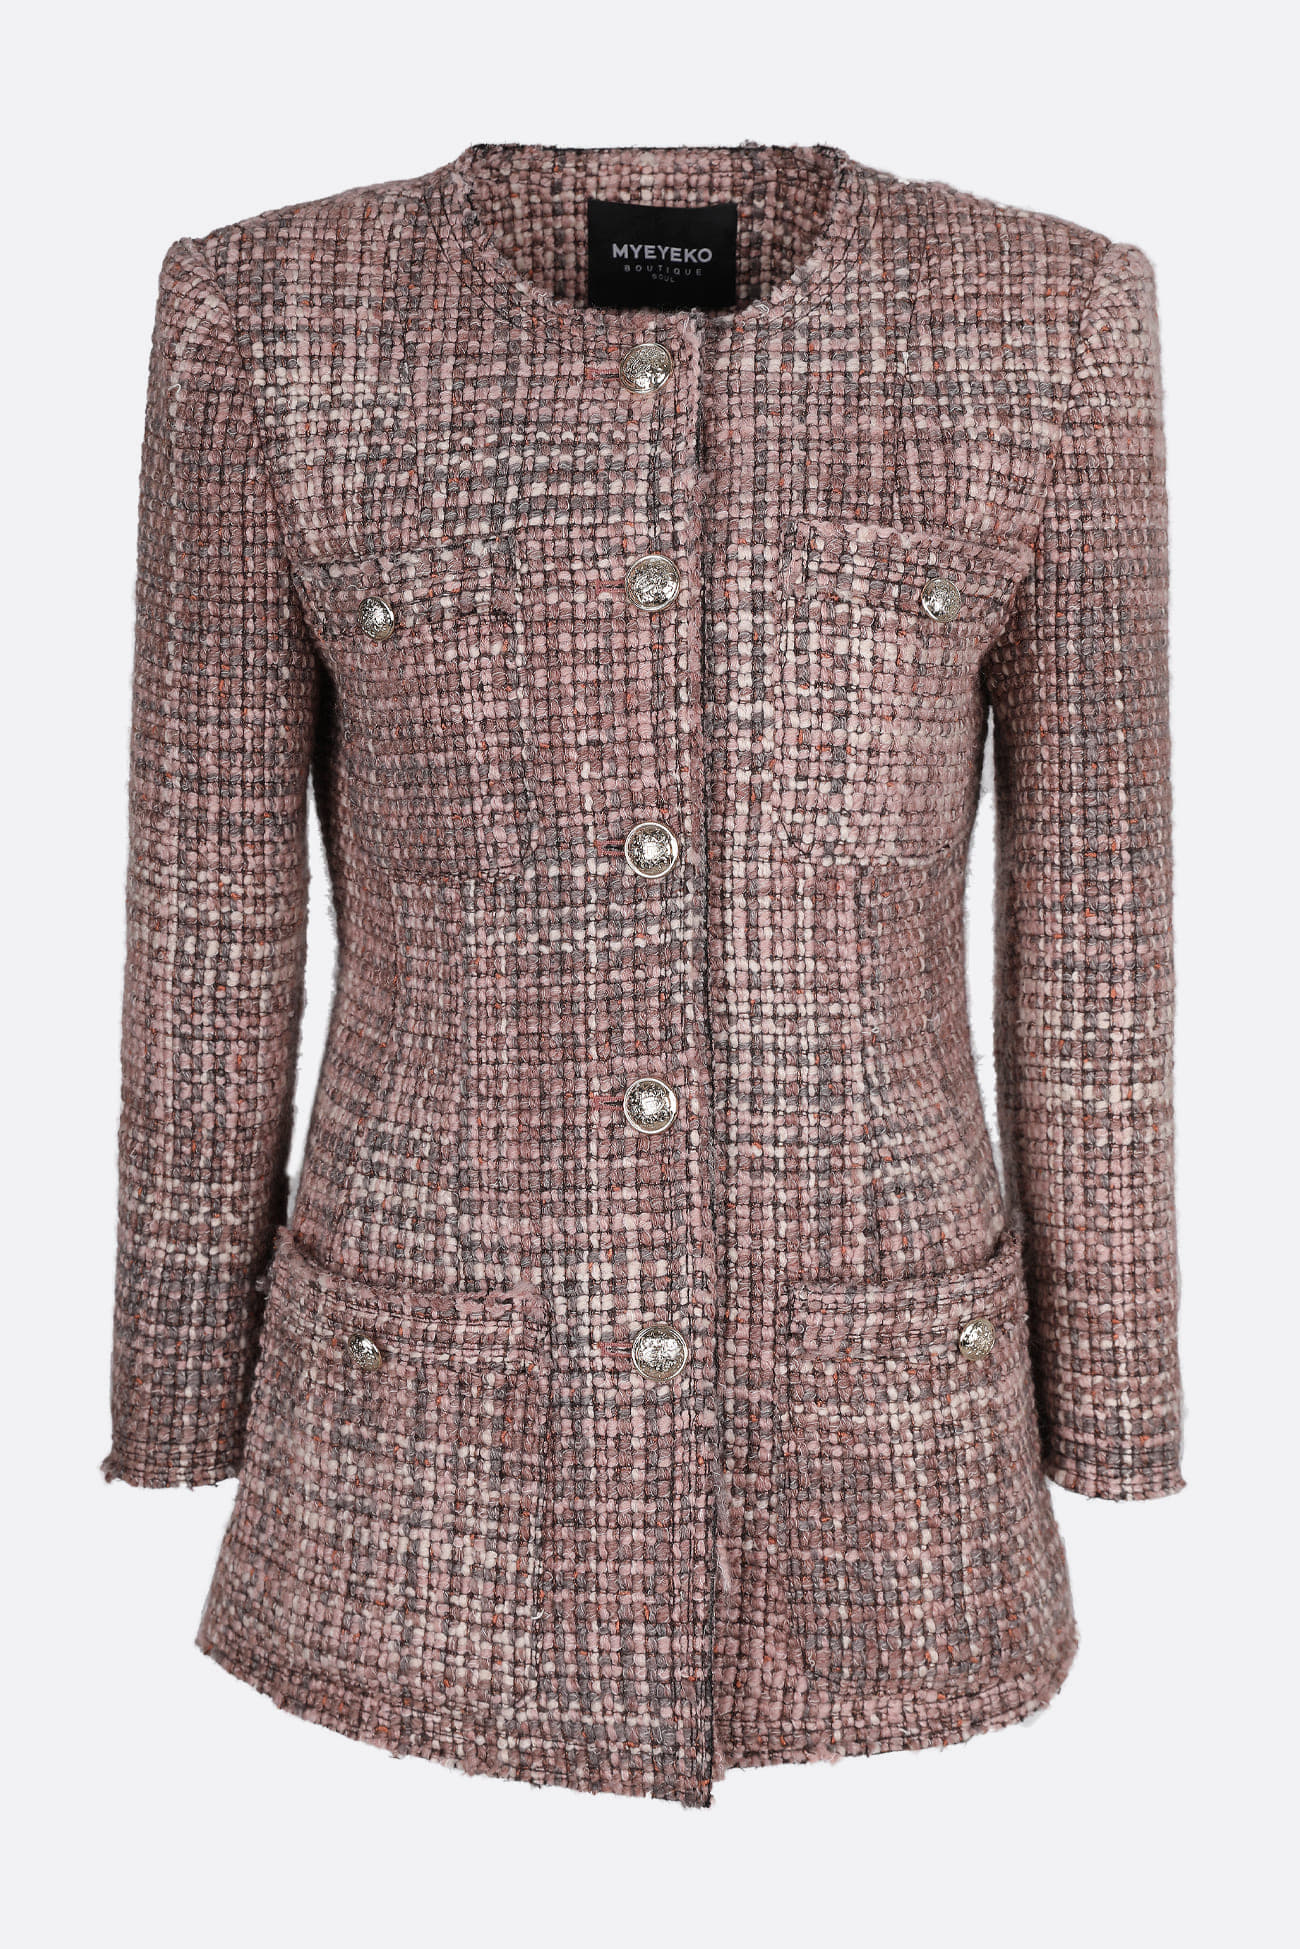 HIGH QUALITY LINE - TWEED CLASSIC JACKET (Exclusive for Myeyeko) Limited Edition